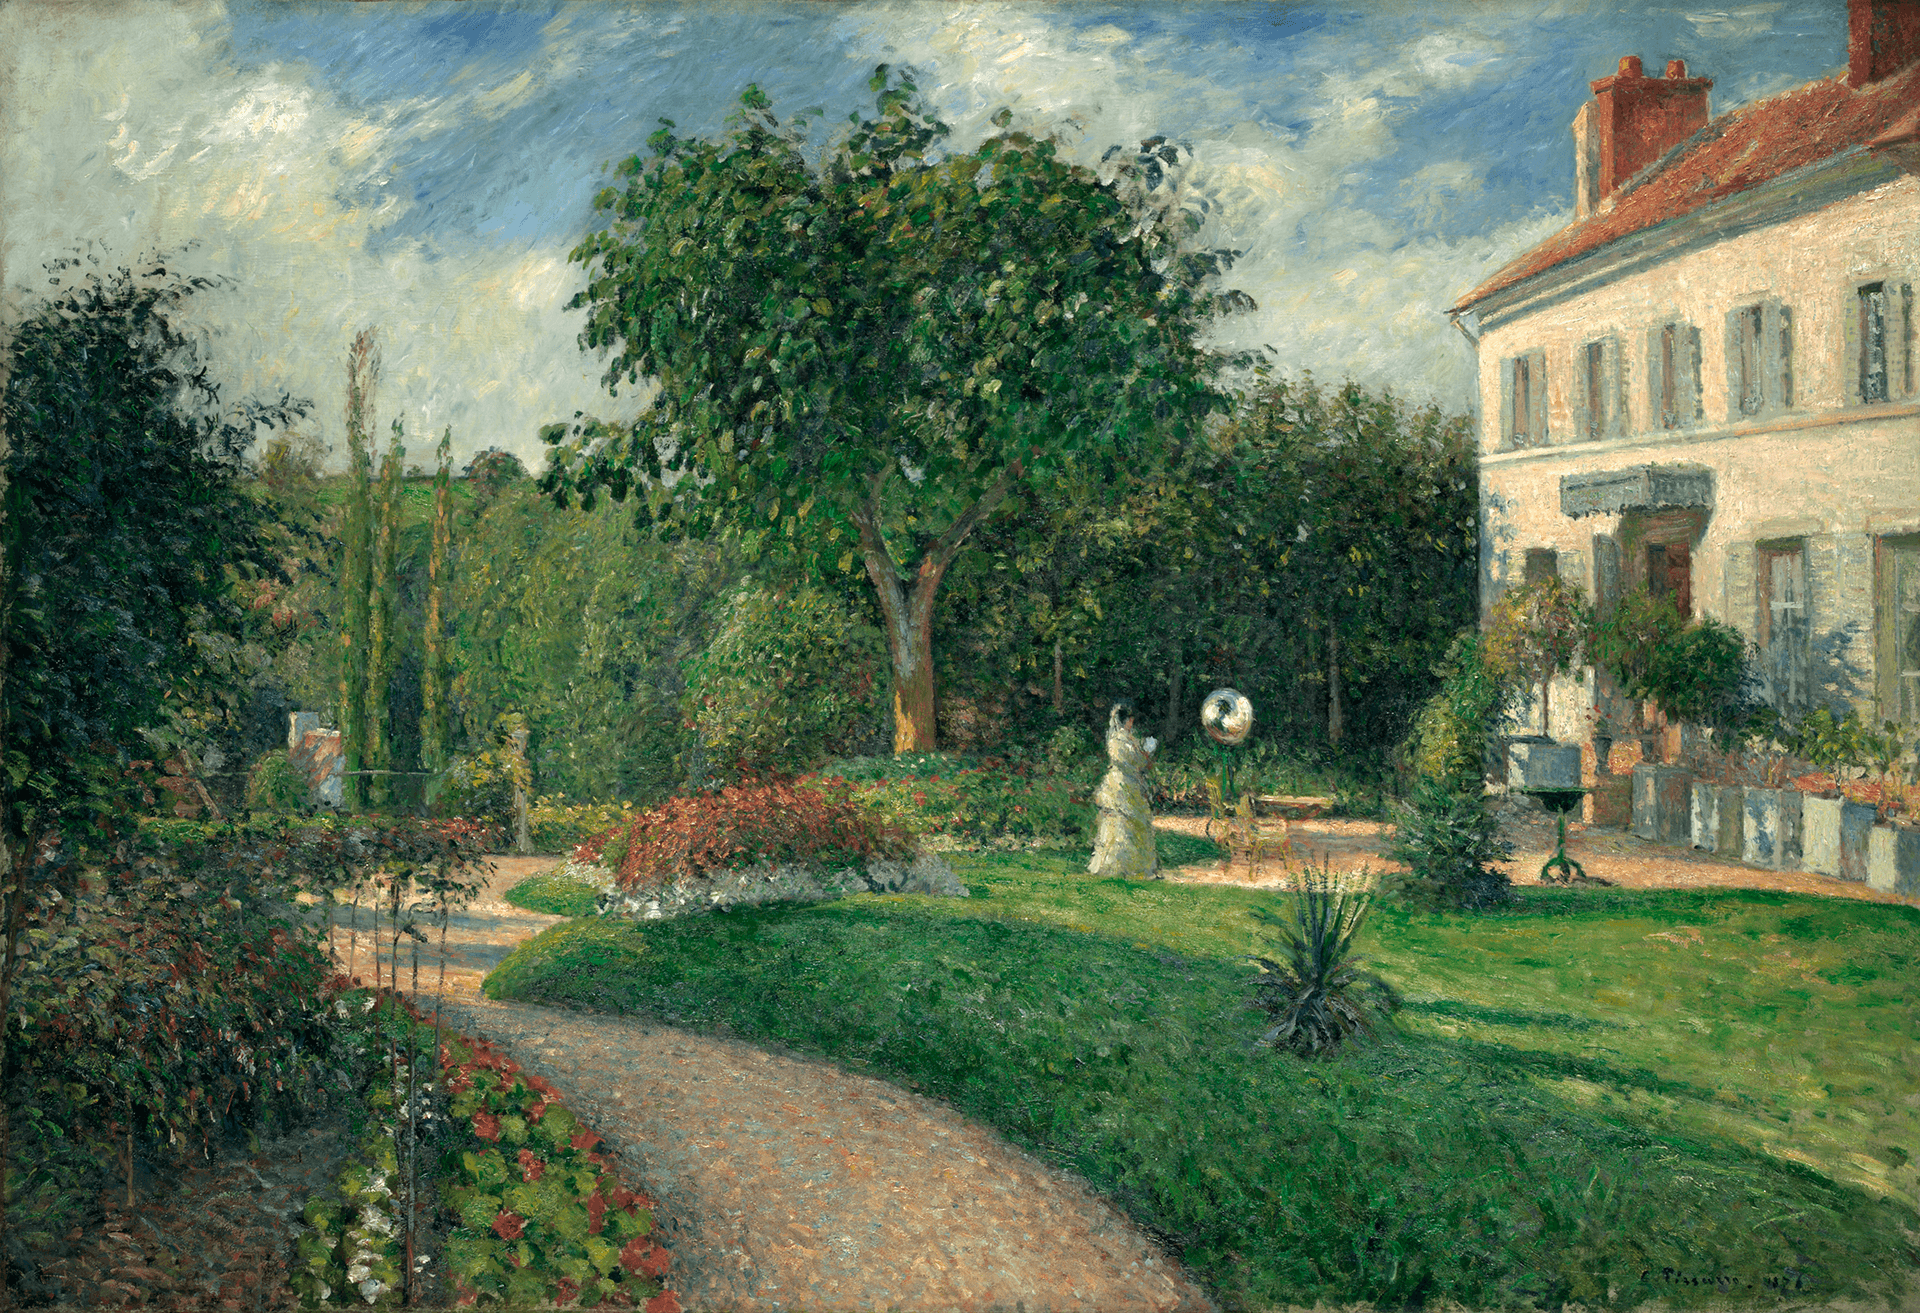 A path leads through a blooming garden. A white house is at the right and a woman stands before it